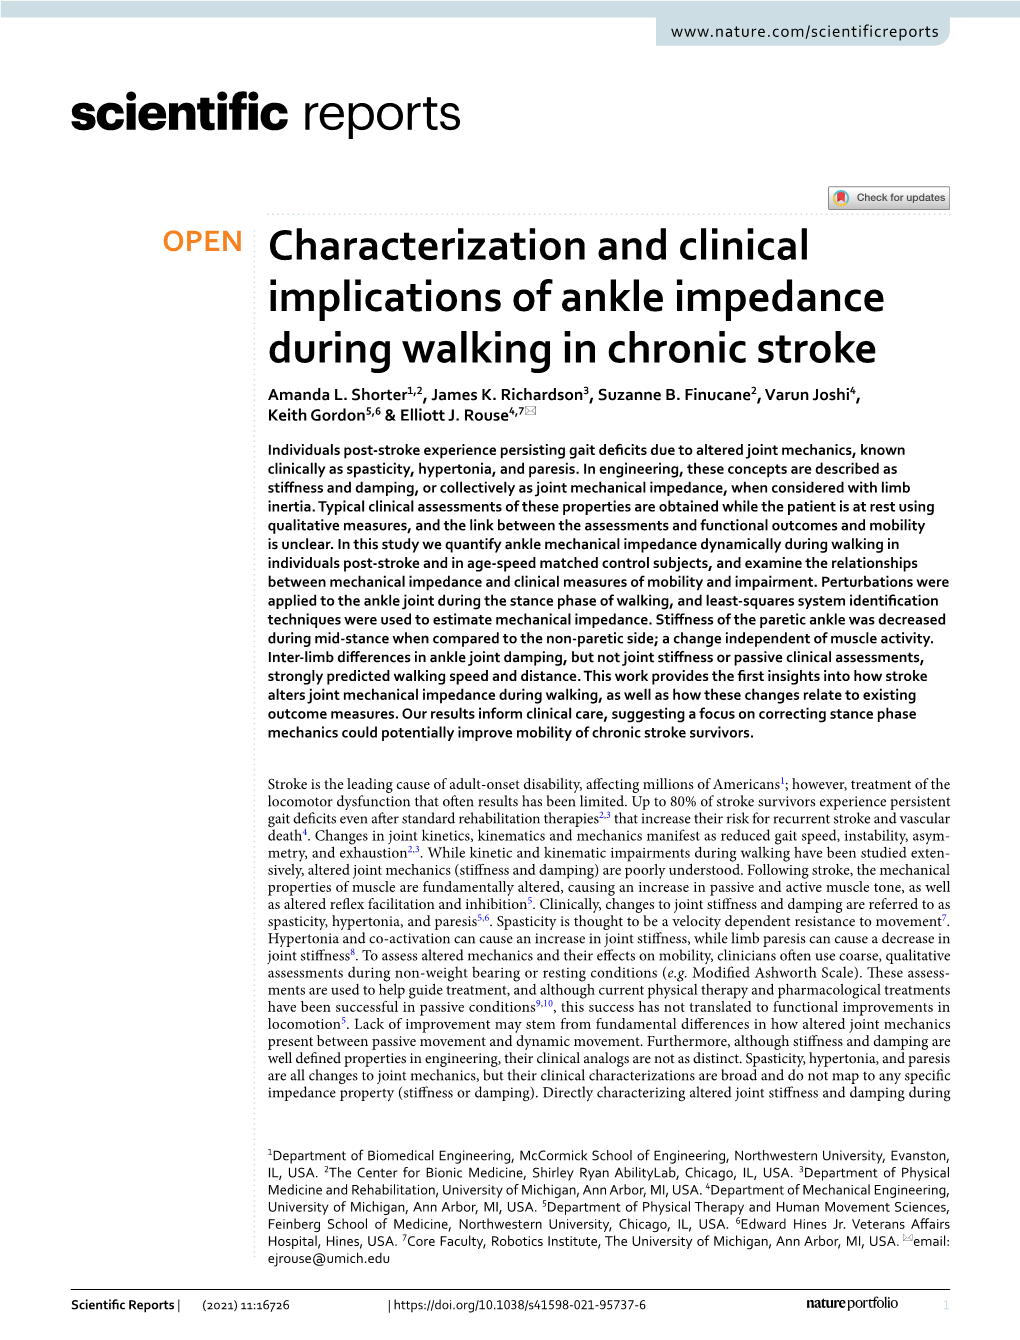 Characterization and Clinical Implications of Ankle Impedance During Walking in Chronic Stroke Amanda L